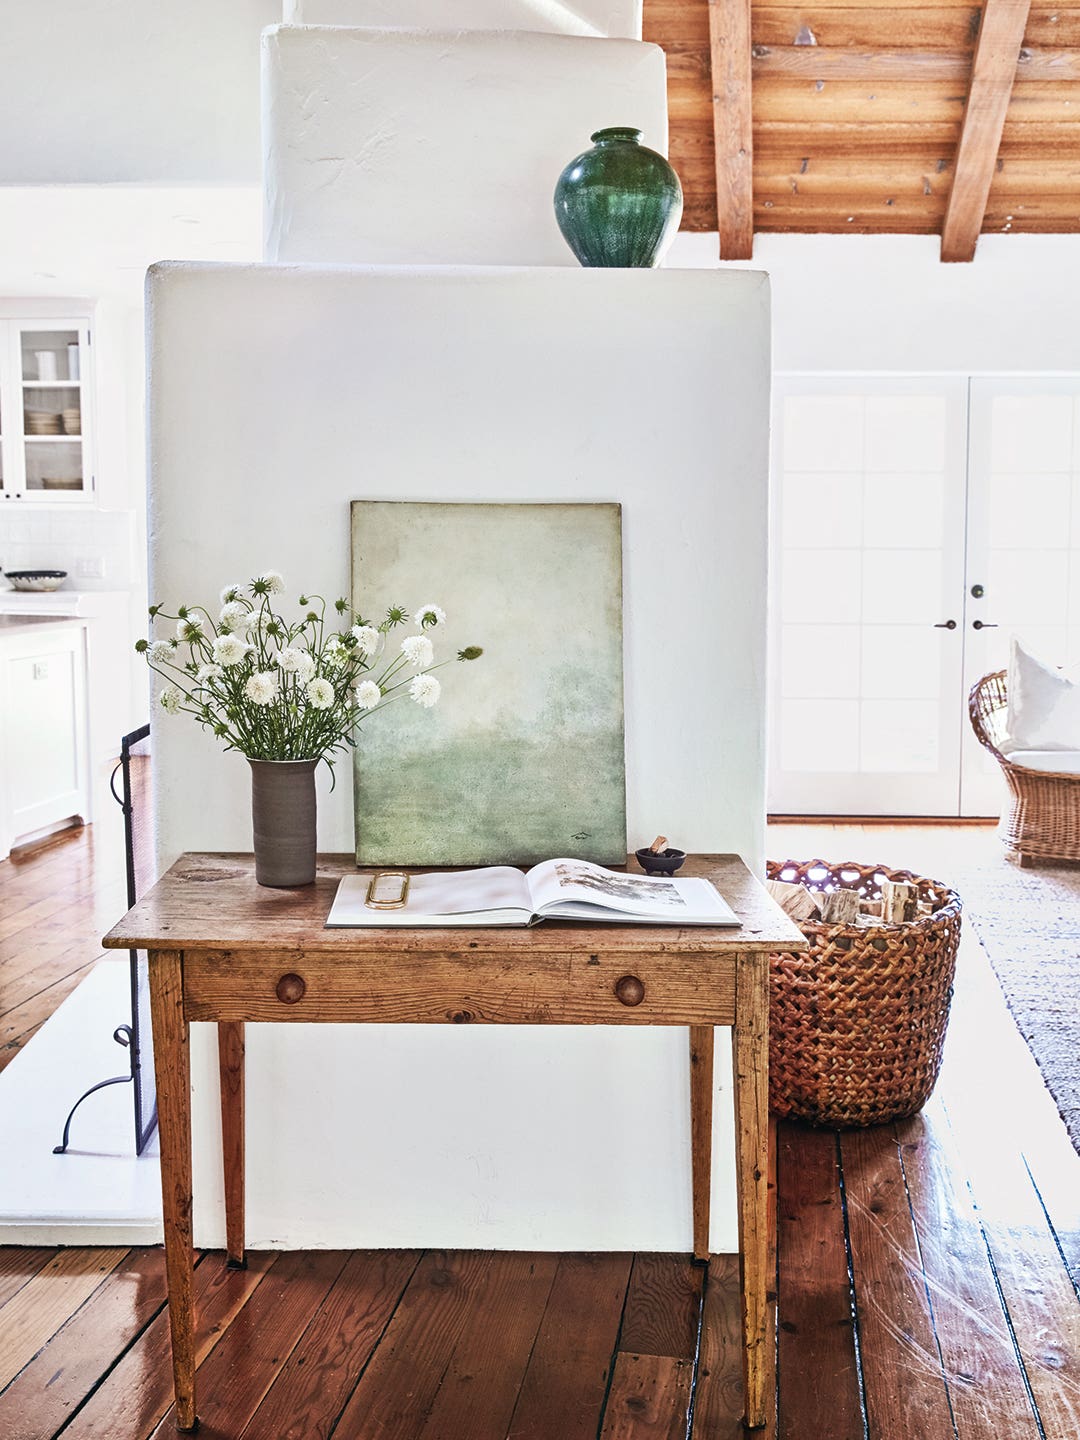 The Decor Trend That Ousted Cottagecore: Coastal Grandmother